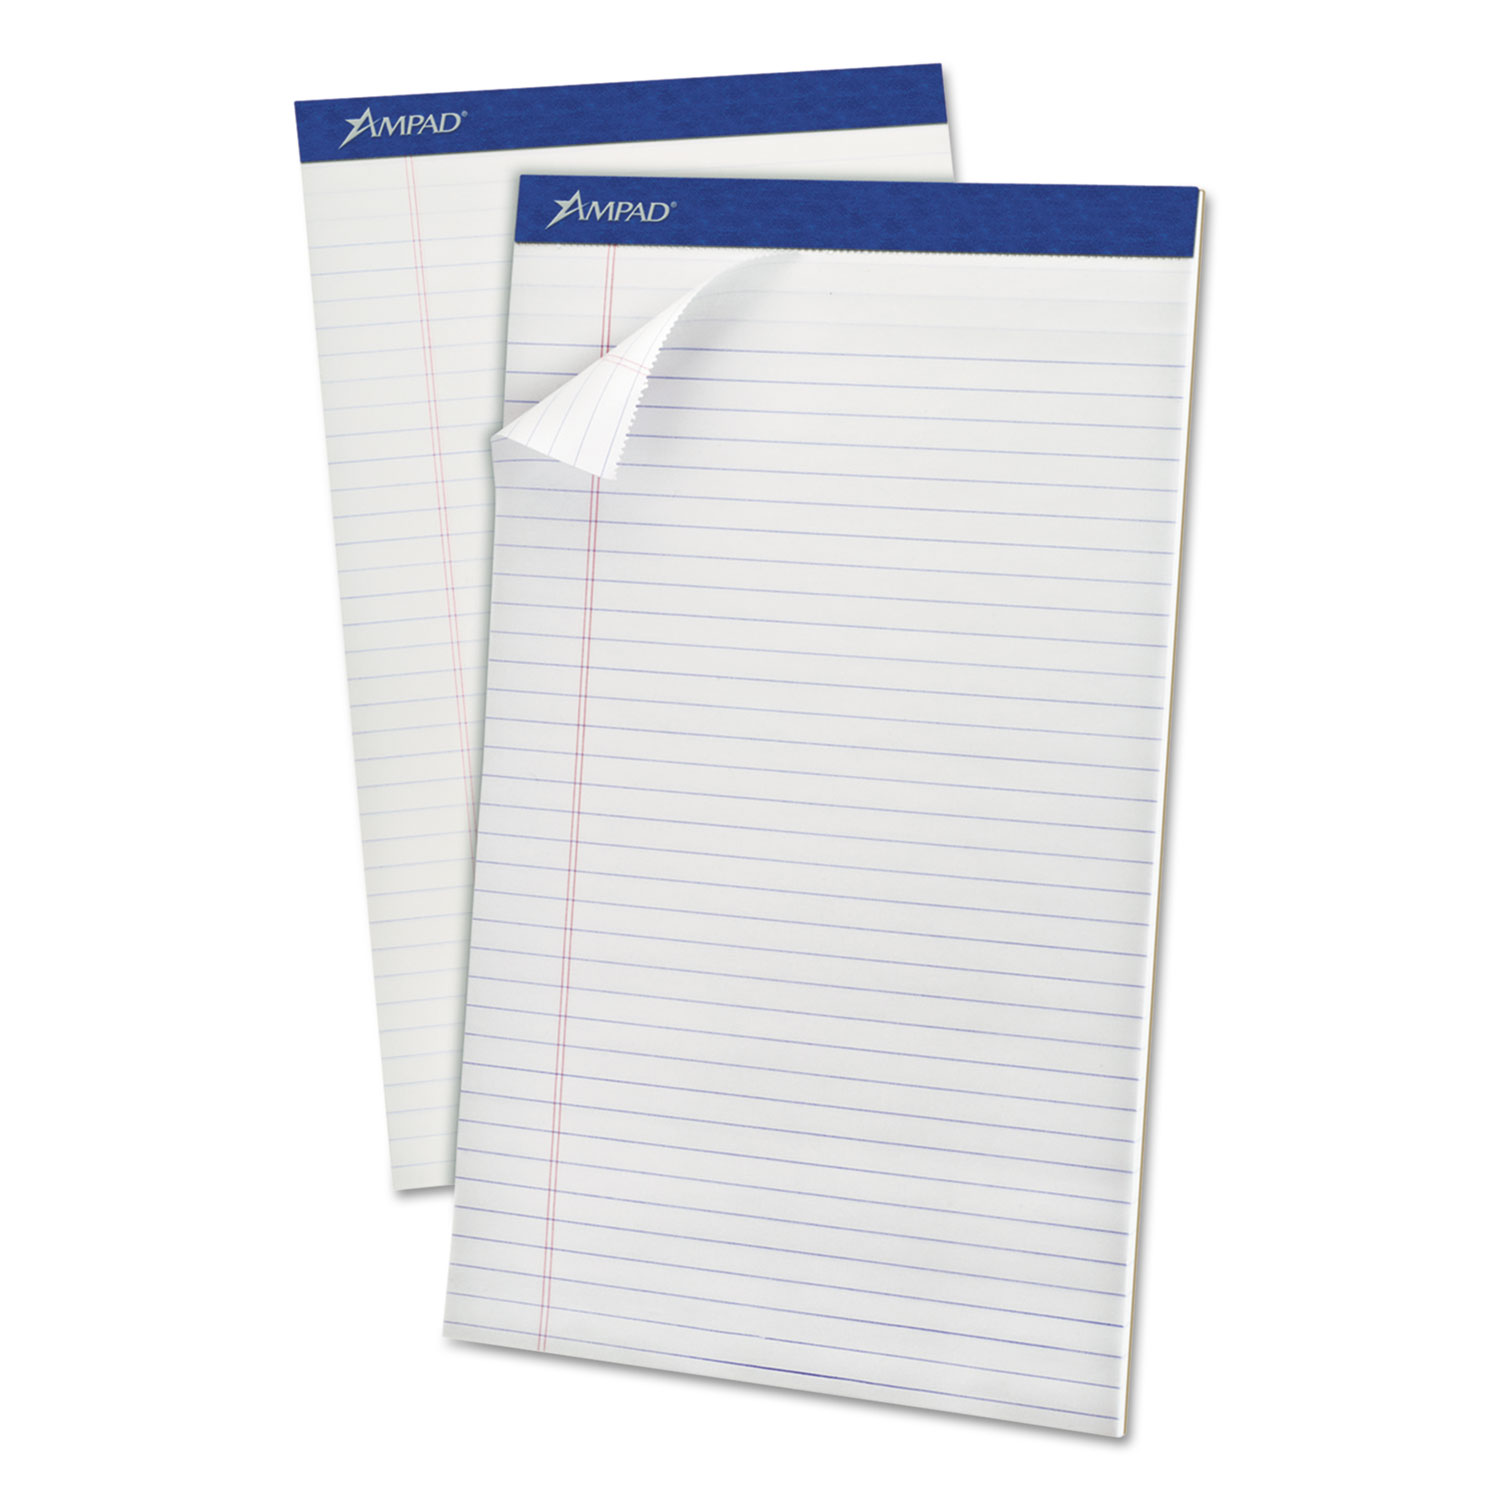  Ampad 20-330 Perforated Writing Pads, Wide/Legal Rule, 8.5 x 14, White, 50 Sheets, Dozen (TOP20330) 